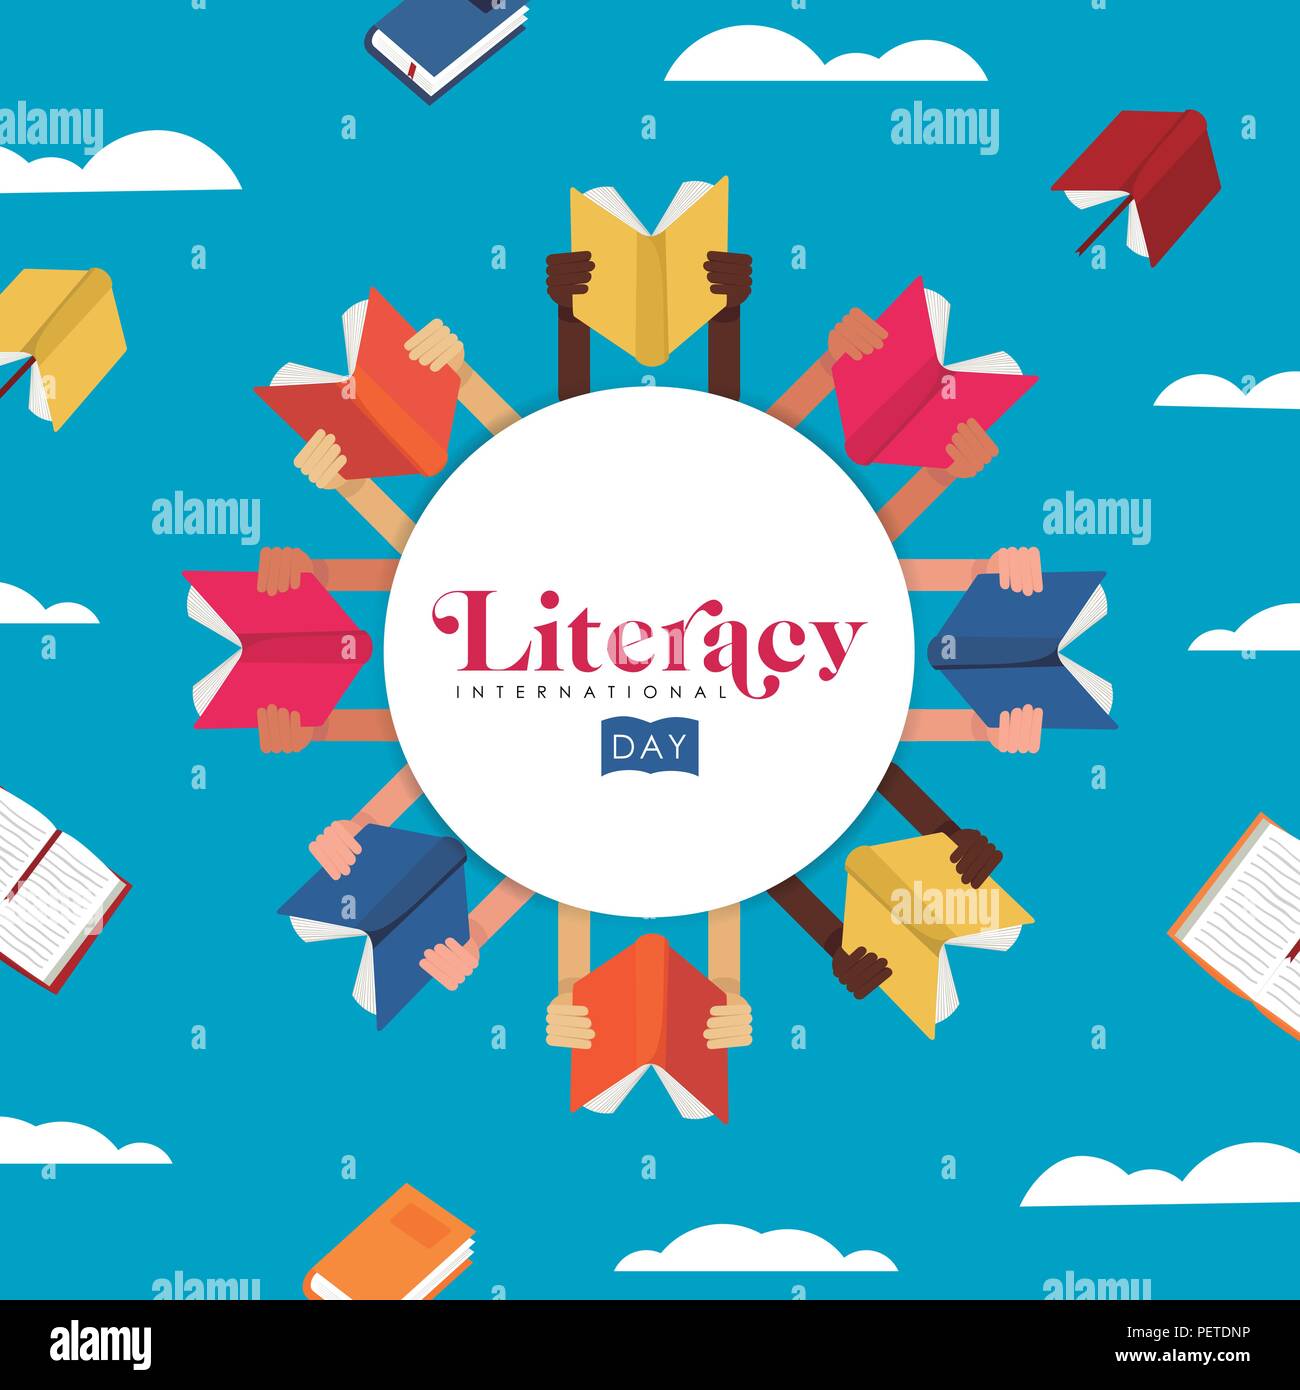 International Literacy Day illustration of children hands with education books and typography text. EPS10 vector. Stock Vector